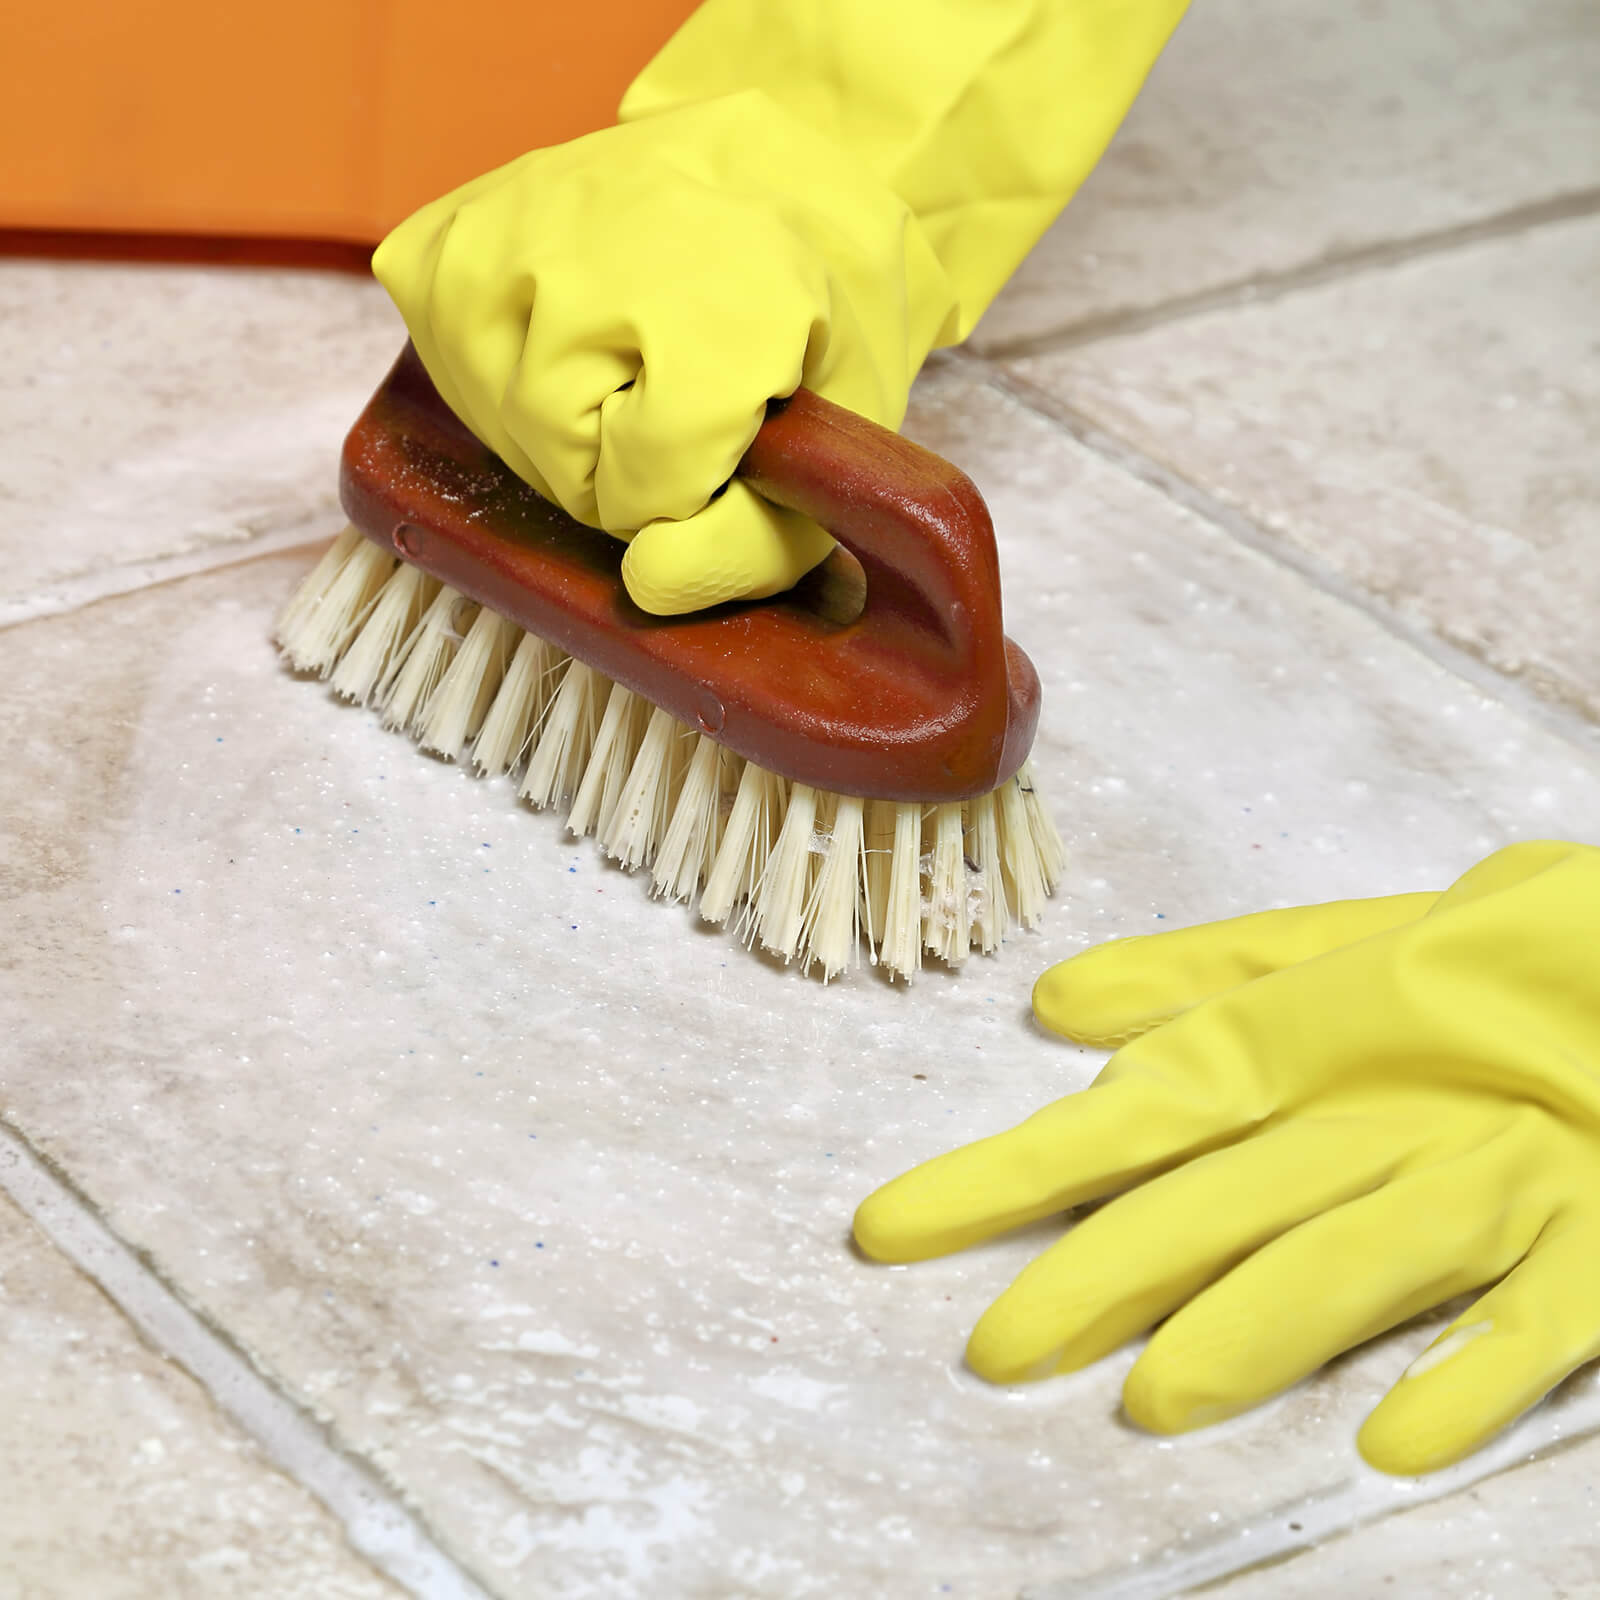 Tile cleaning | Great Lakes Carpet & Tile